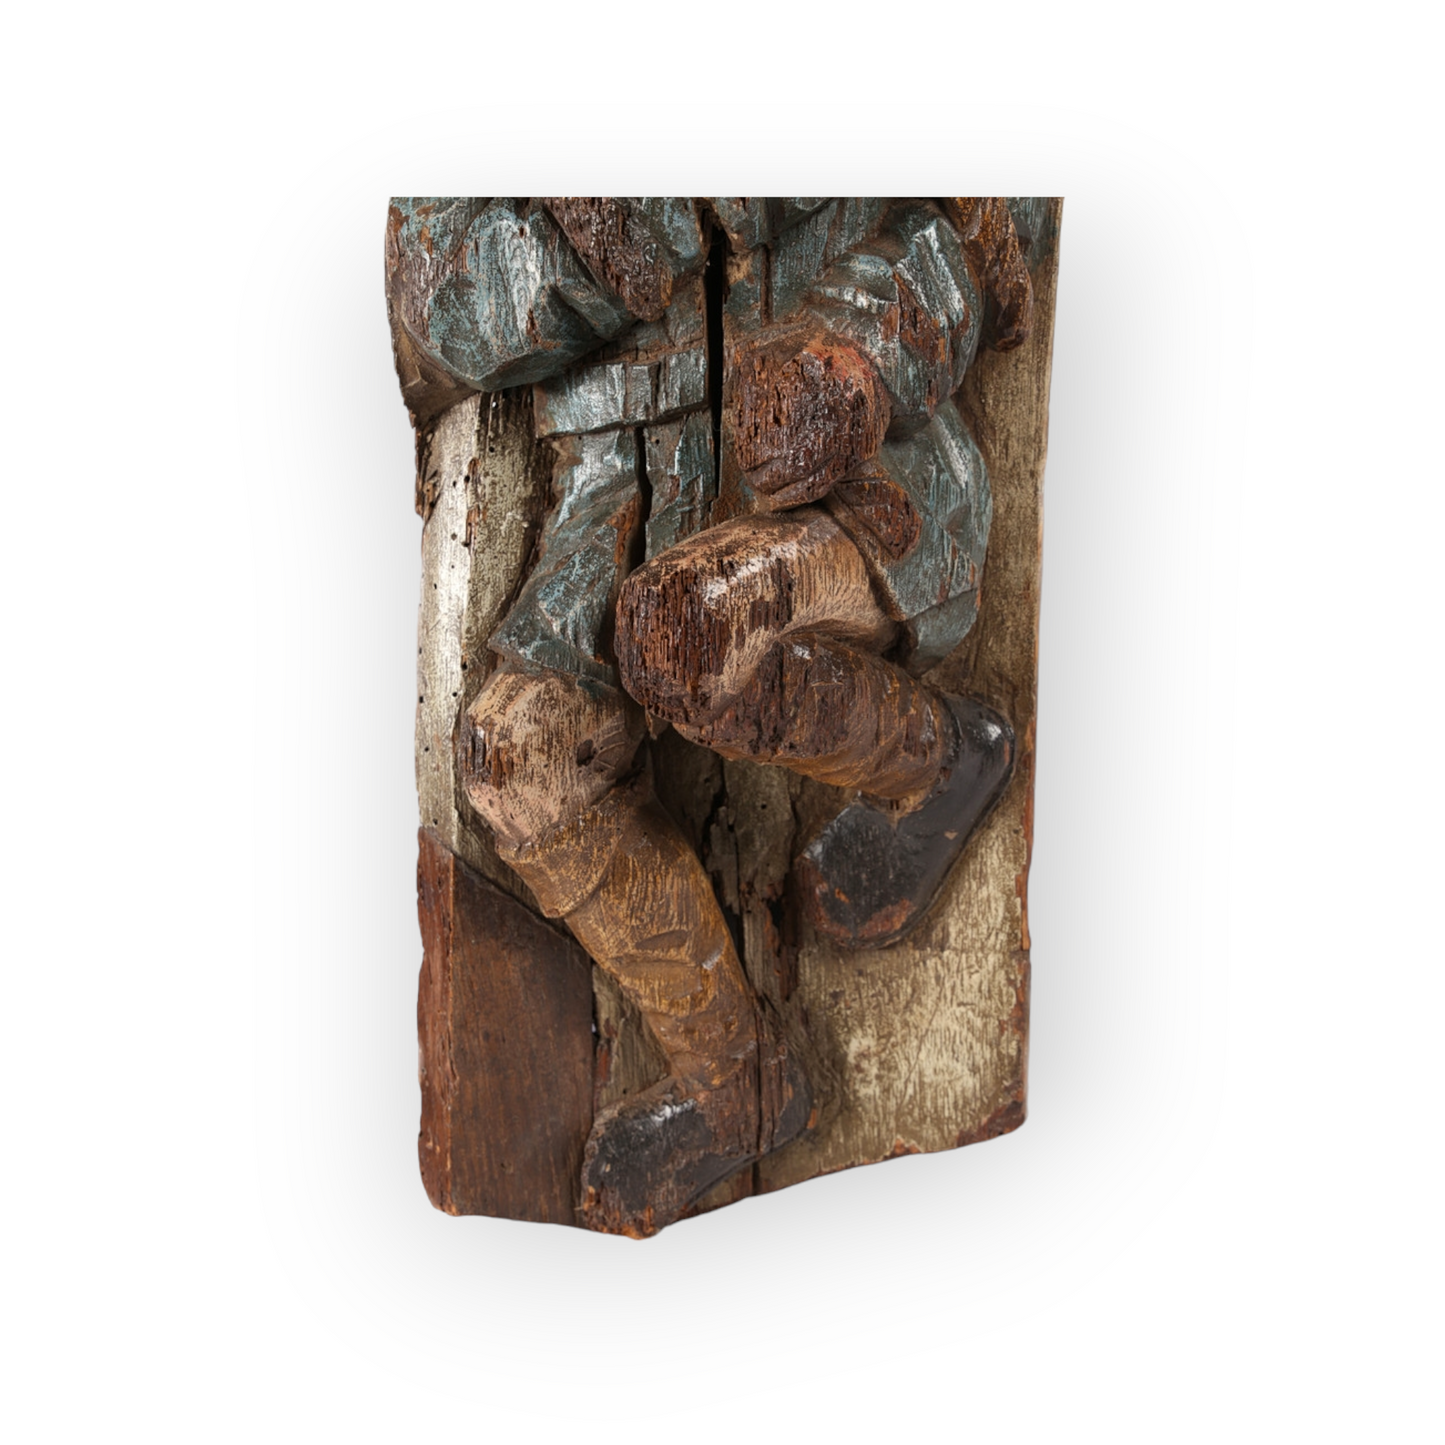 A Large & Rare 15th Century Antique Carved Pine Panel Depicting a Bell Ringer, circa 1450-1480